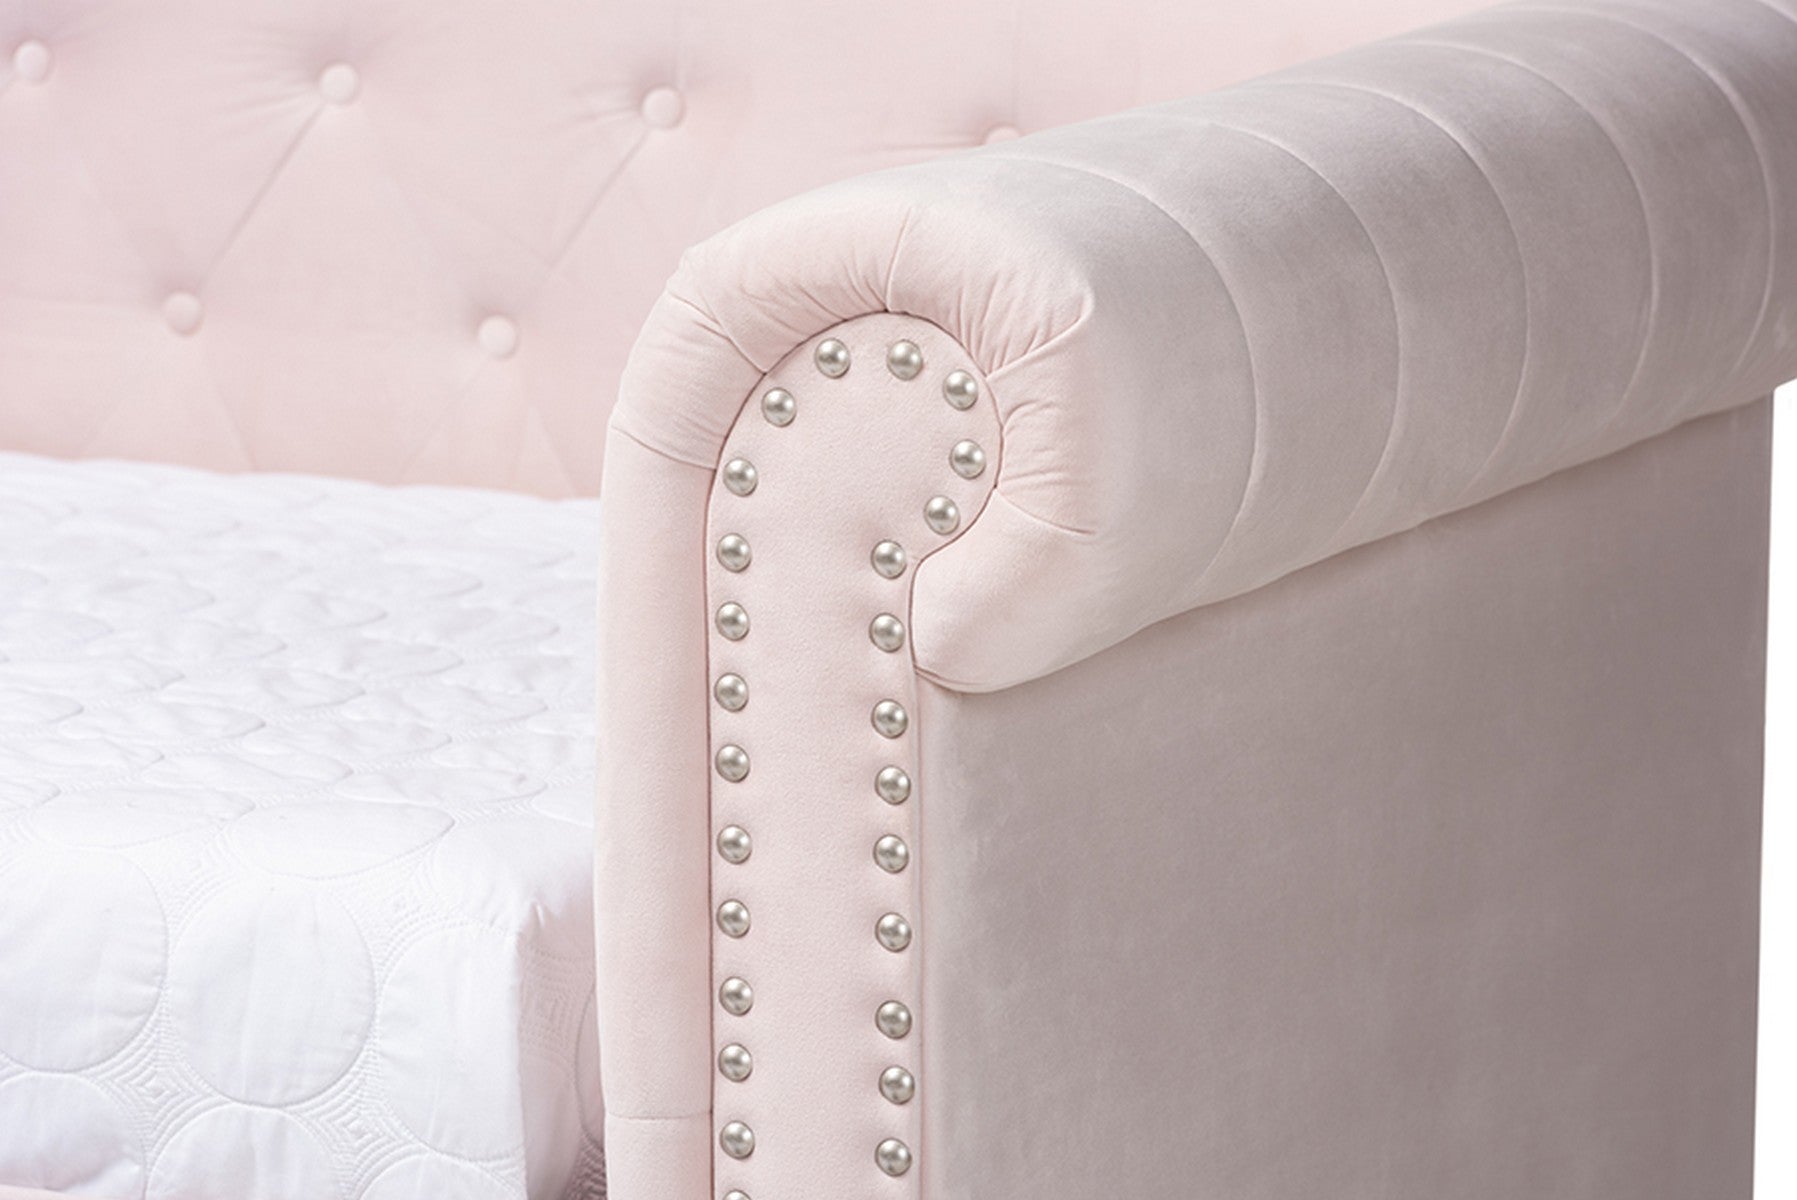 Baxton Studio Mabelle Modern and Contemporary Light Pink Velvet Upholstered Daybed with Trundle